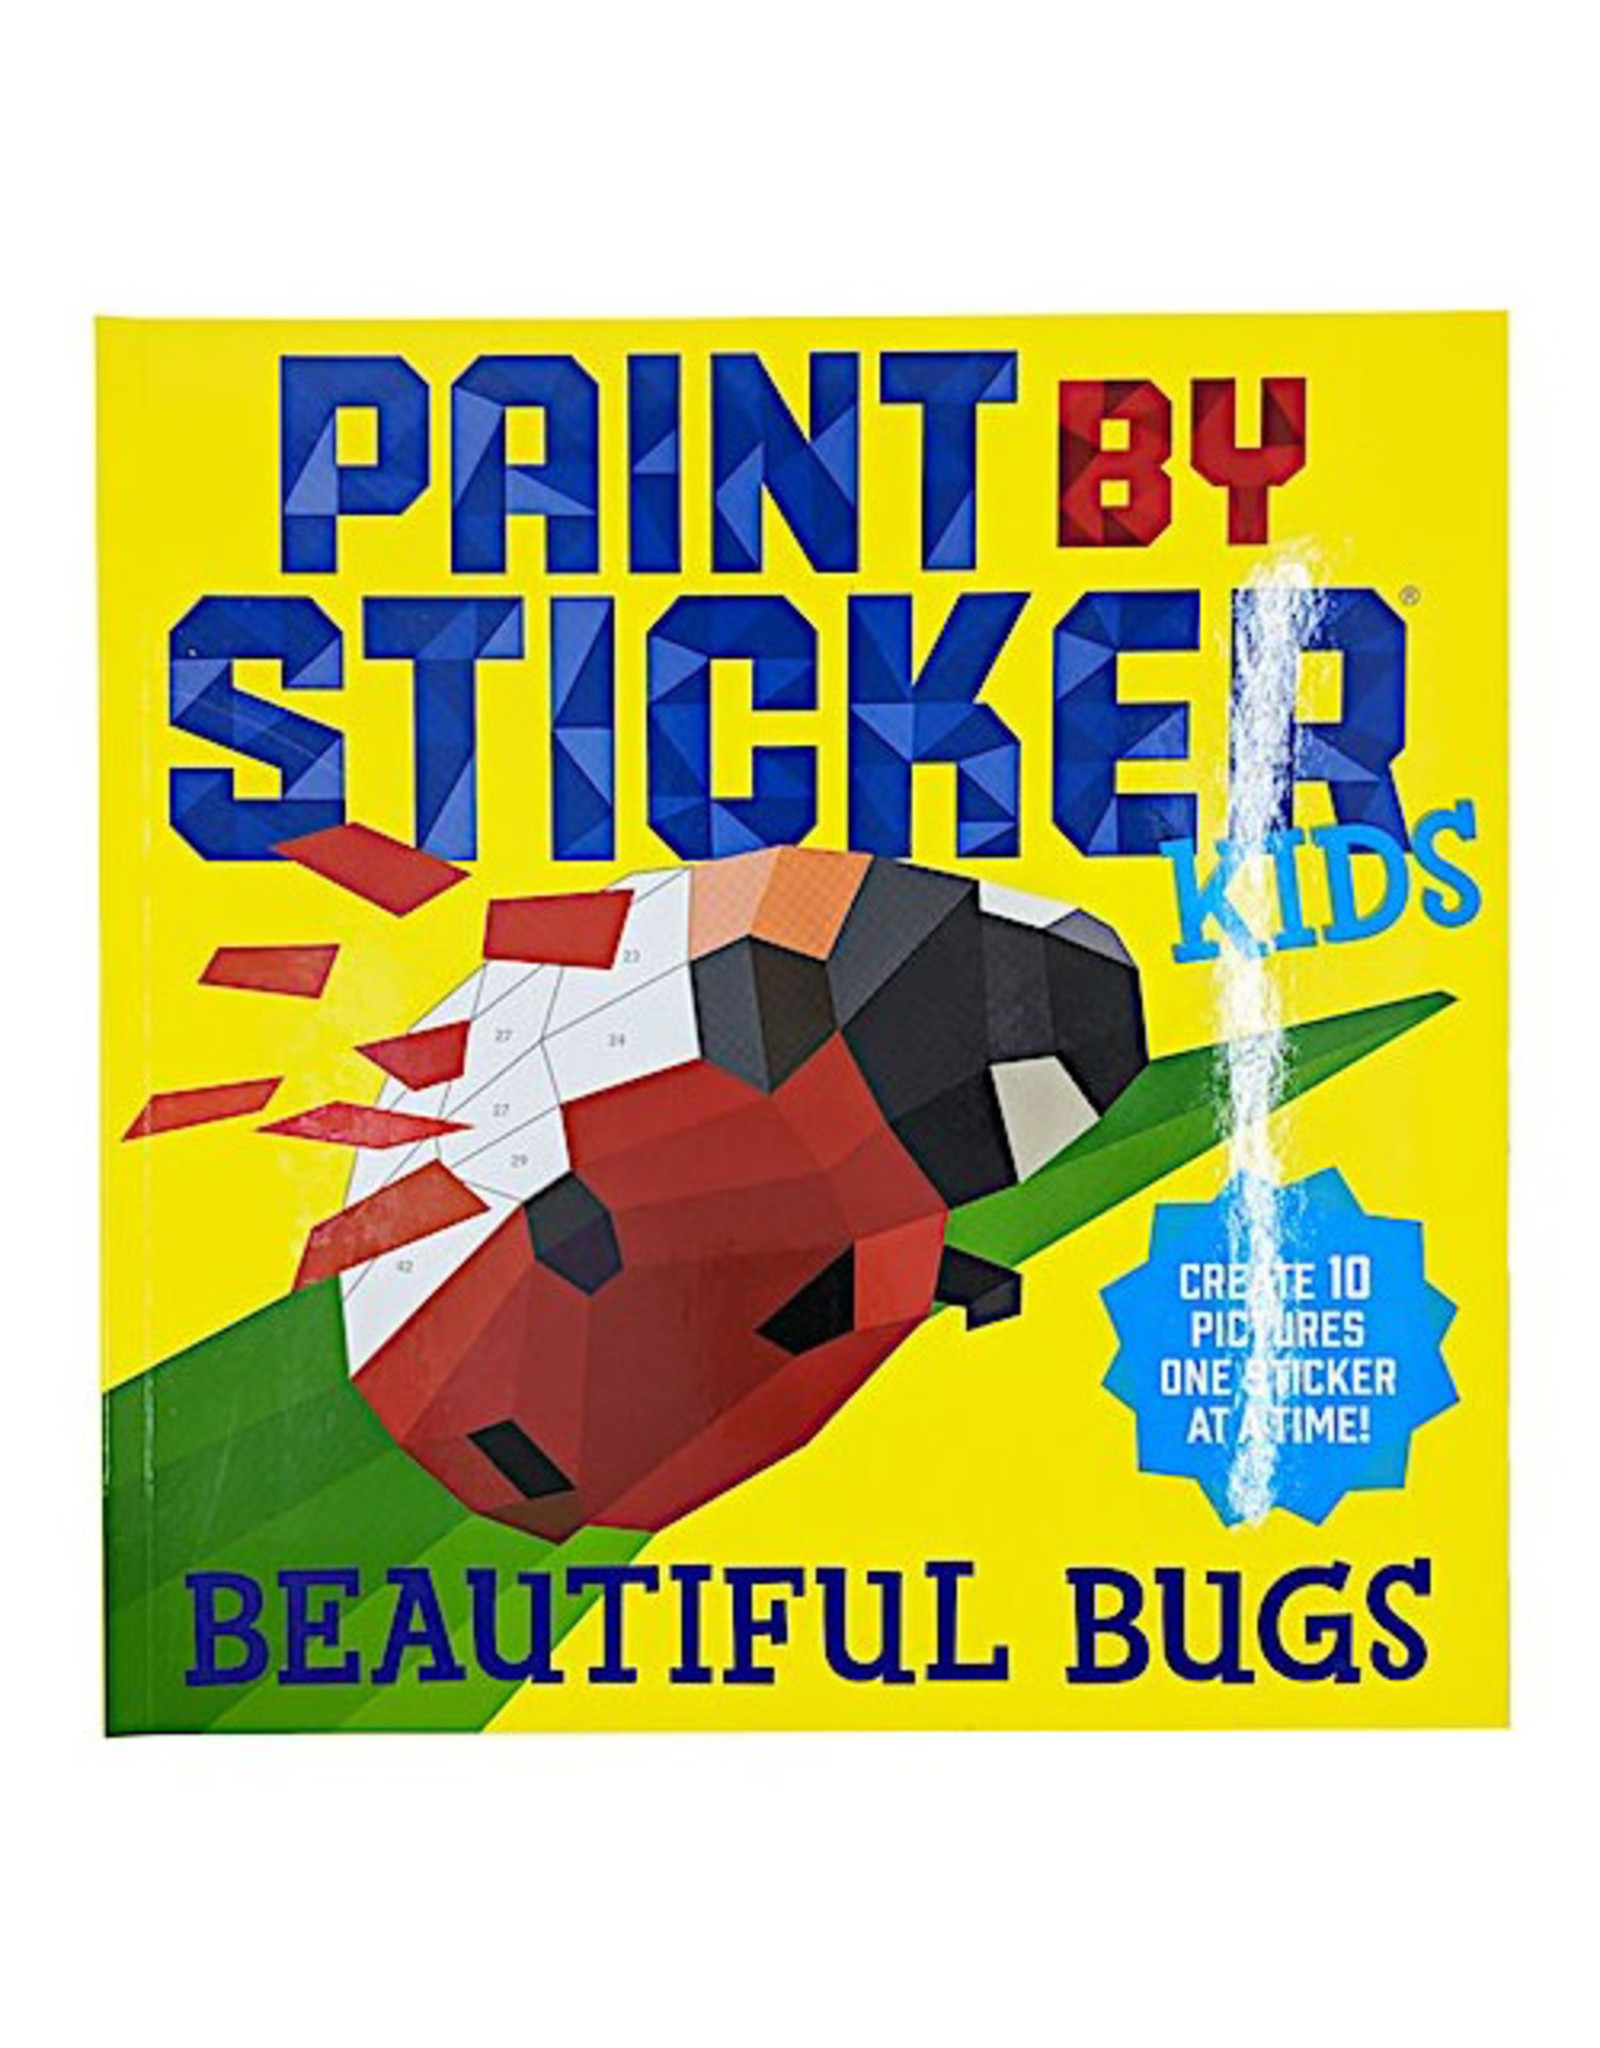 Paint with Stickers Kids